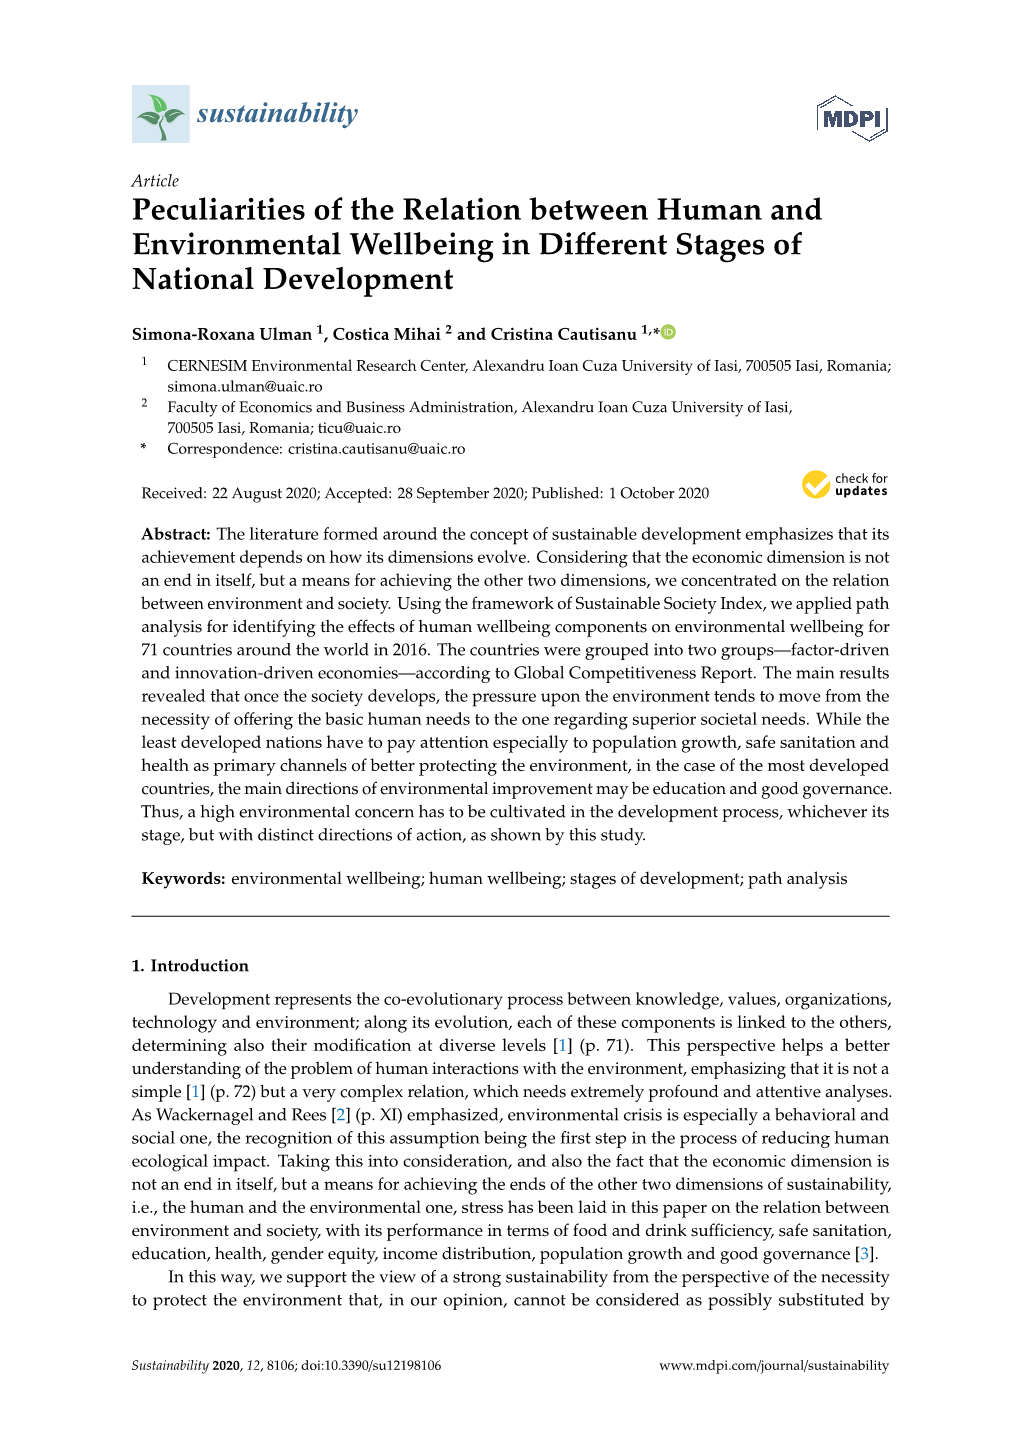 Peculiarities of the Relation Between Human and Environmental Wellbeing in Diﬀerent Stages of National Development